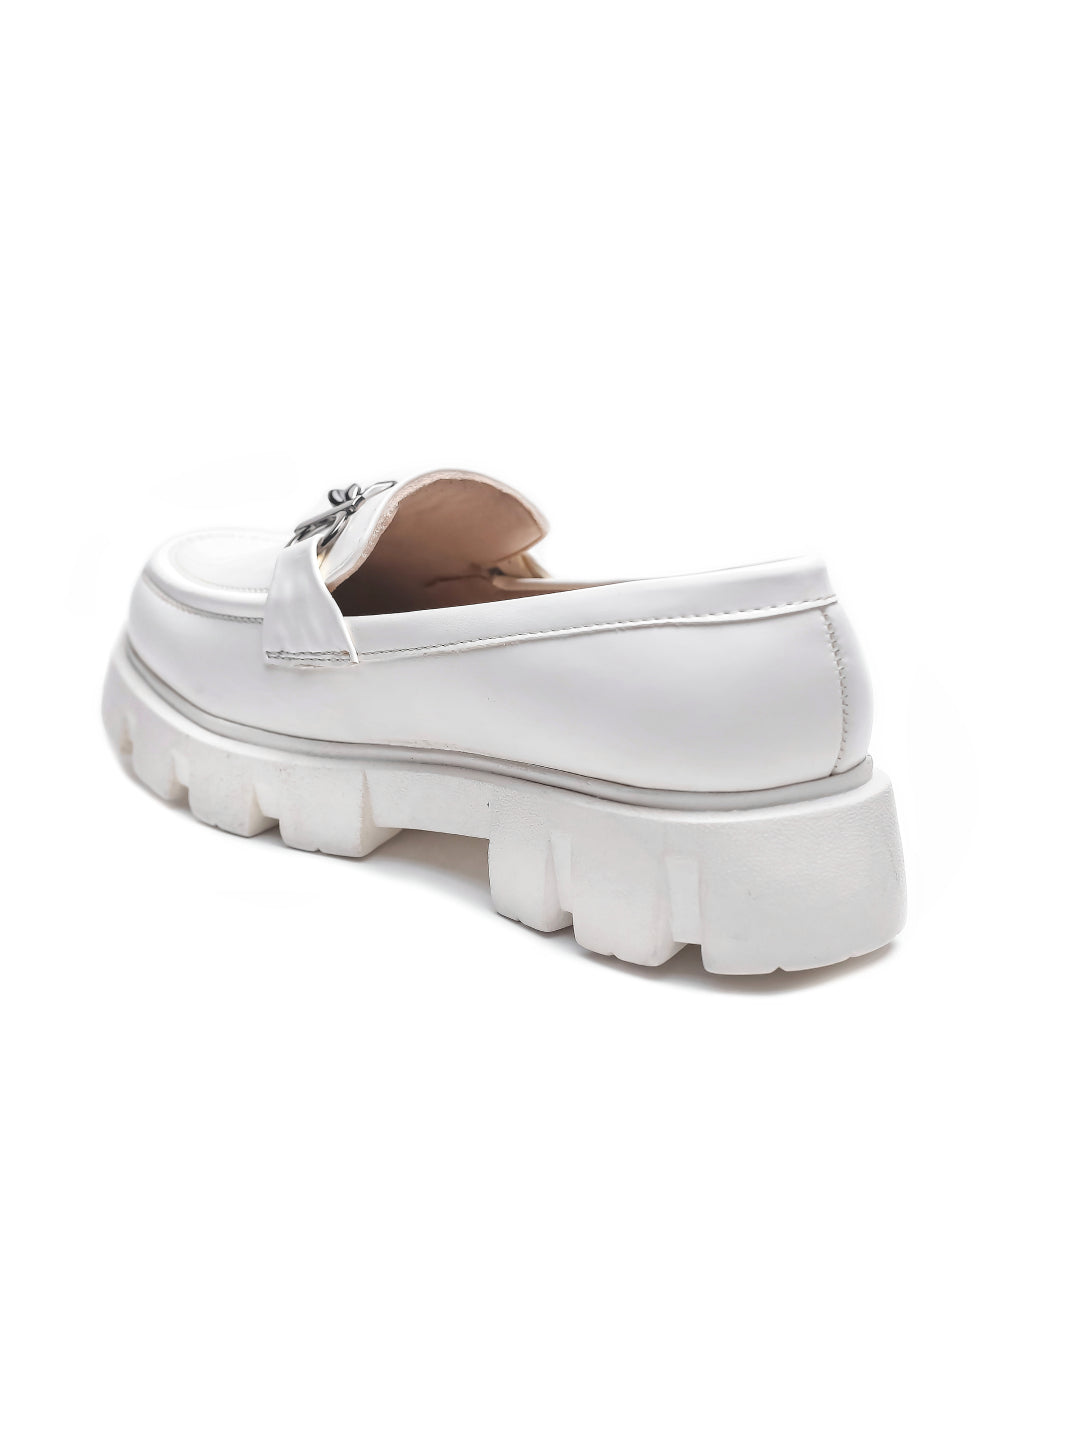 Brauch White Solid Buckle Embellished Loafer Shoe